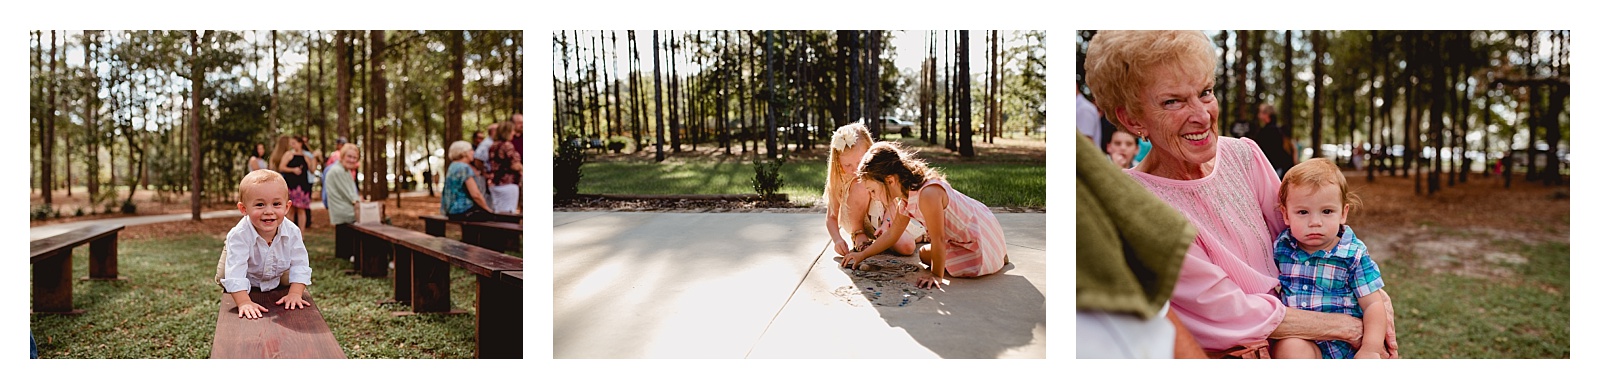 Candid moments of children guests at a wedding. Shelly Williams Photography